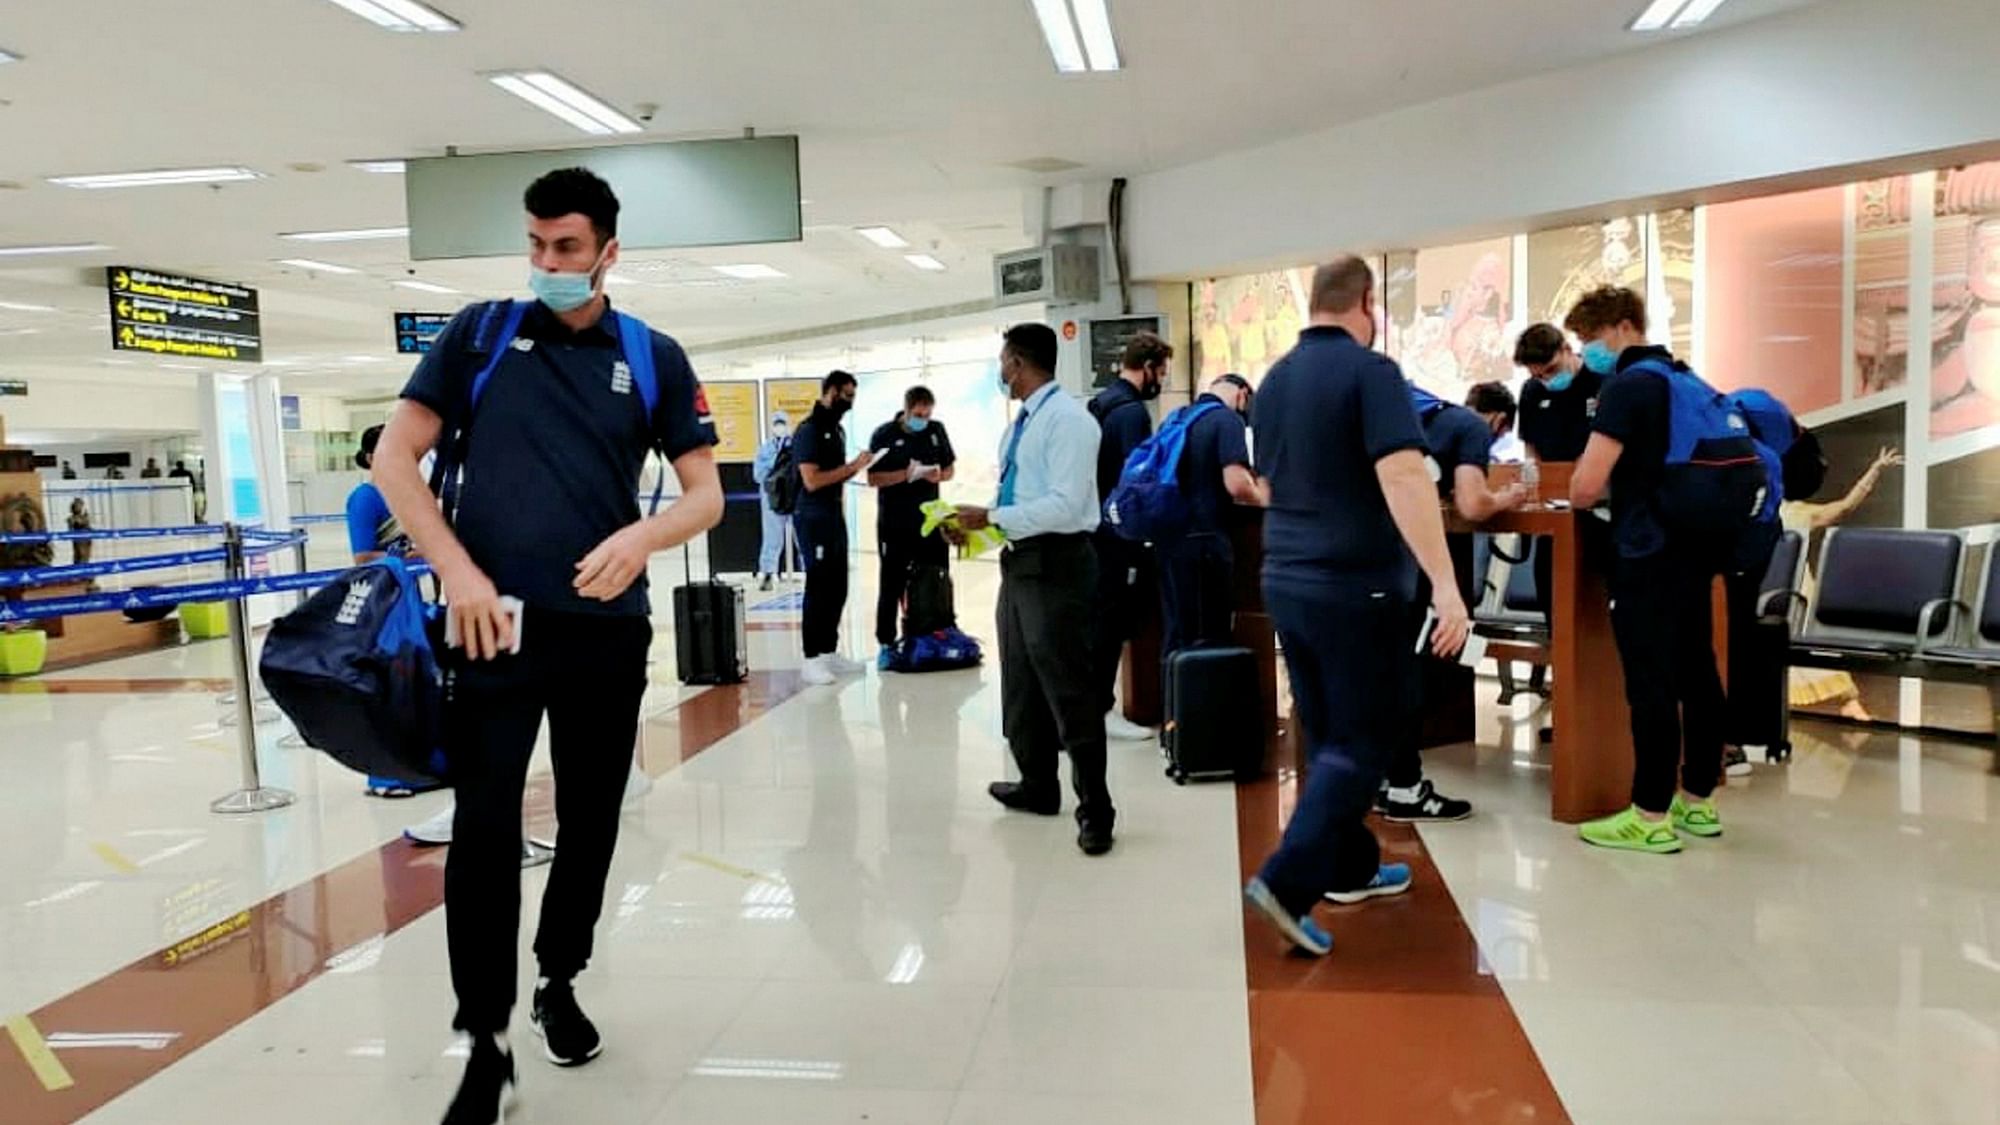 England cricket team arrives at the airport ahead of the test series against India, in Chennai, Wednesday, Jan. 27, 2021.&nbsp;